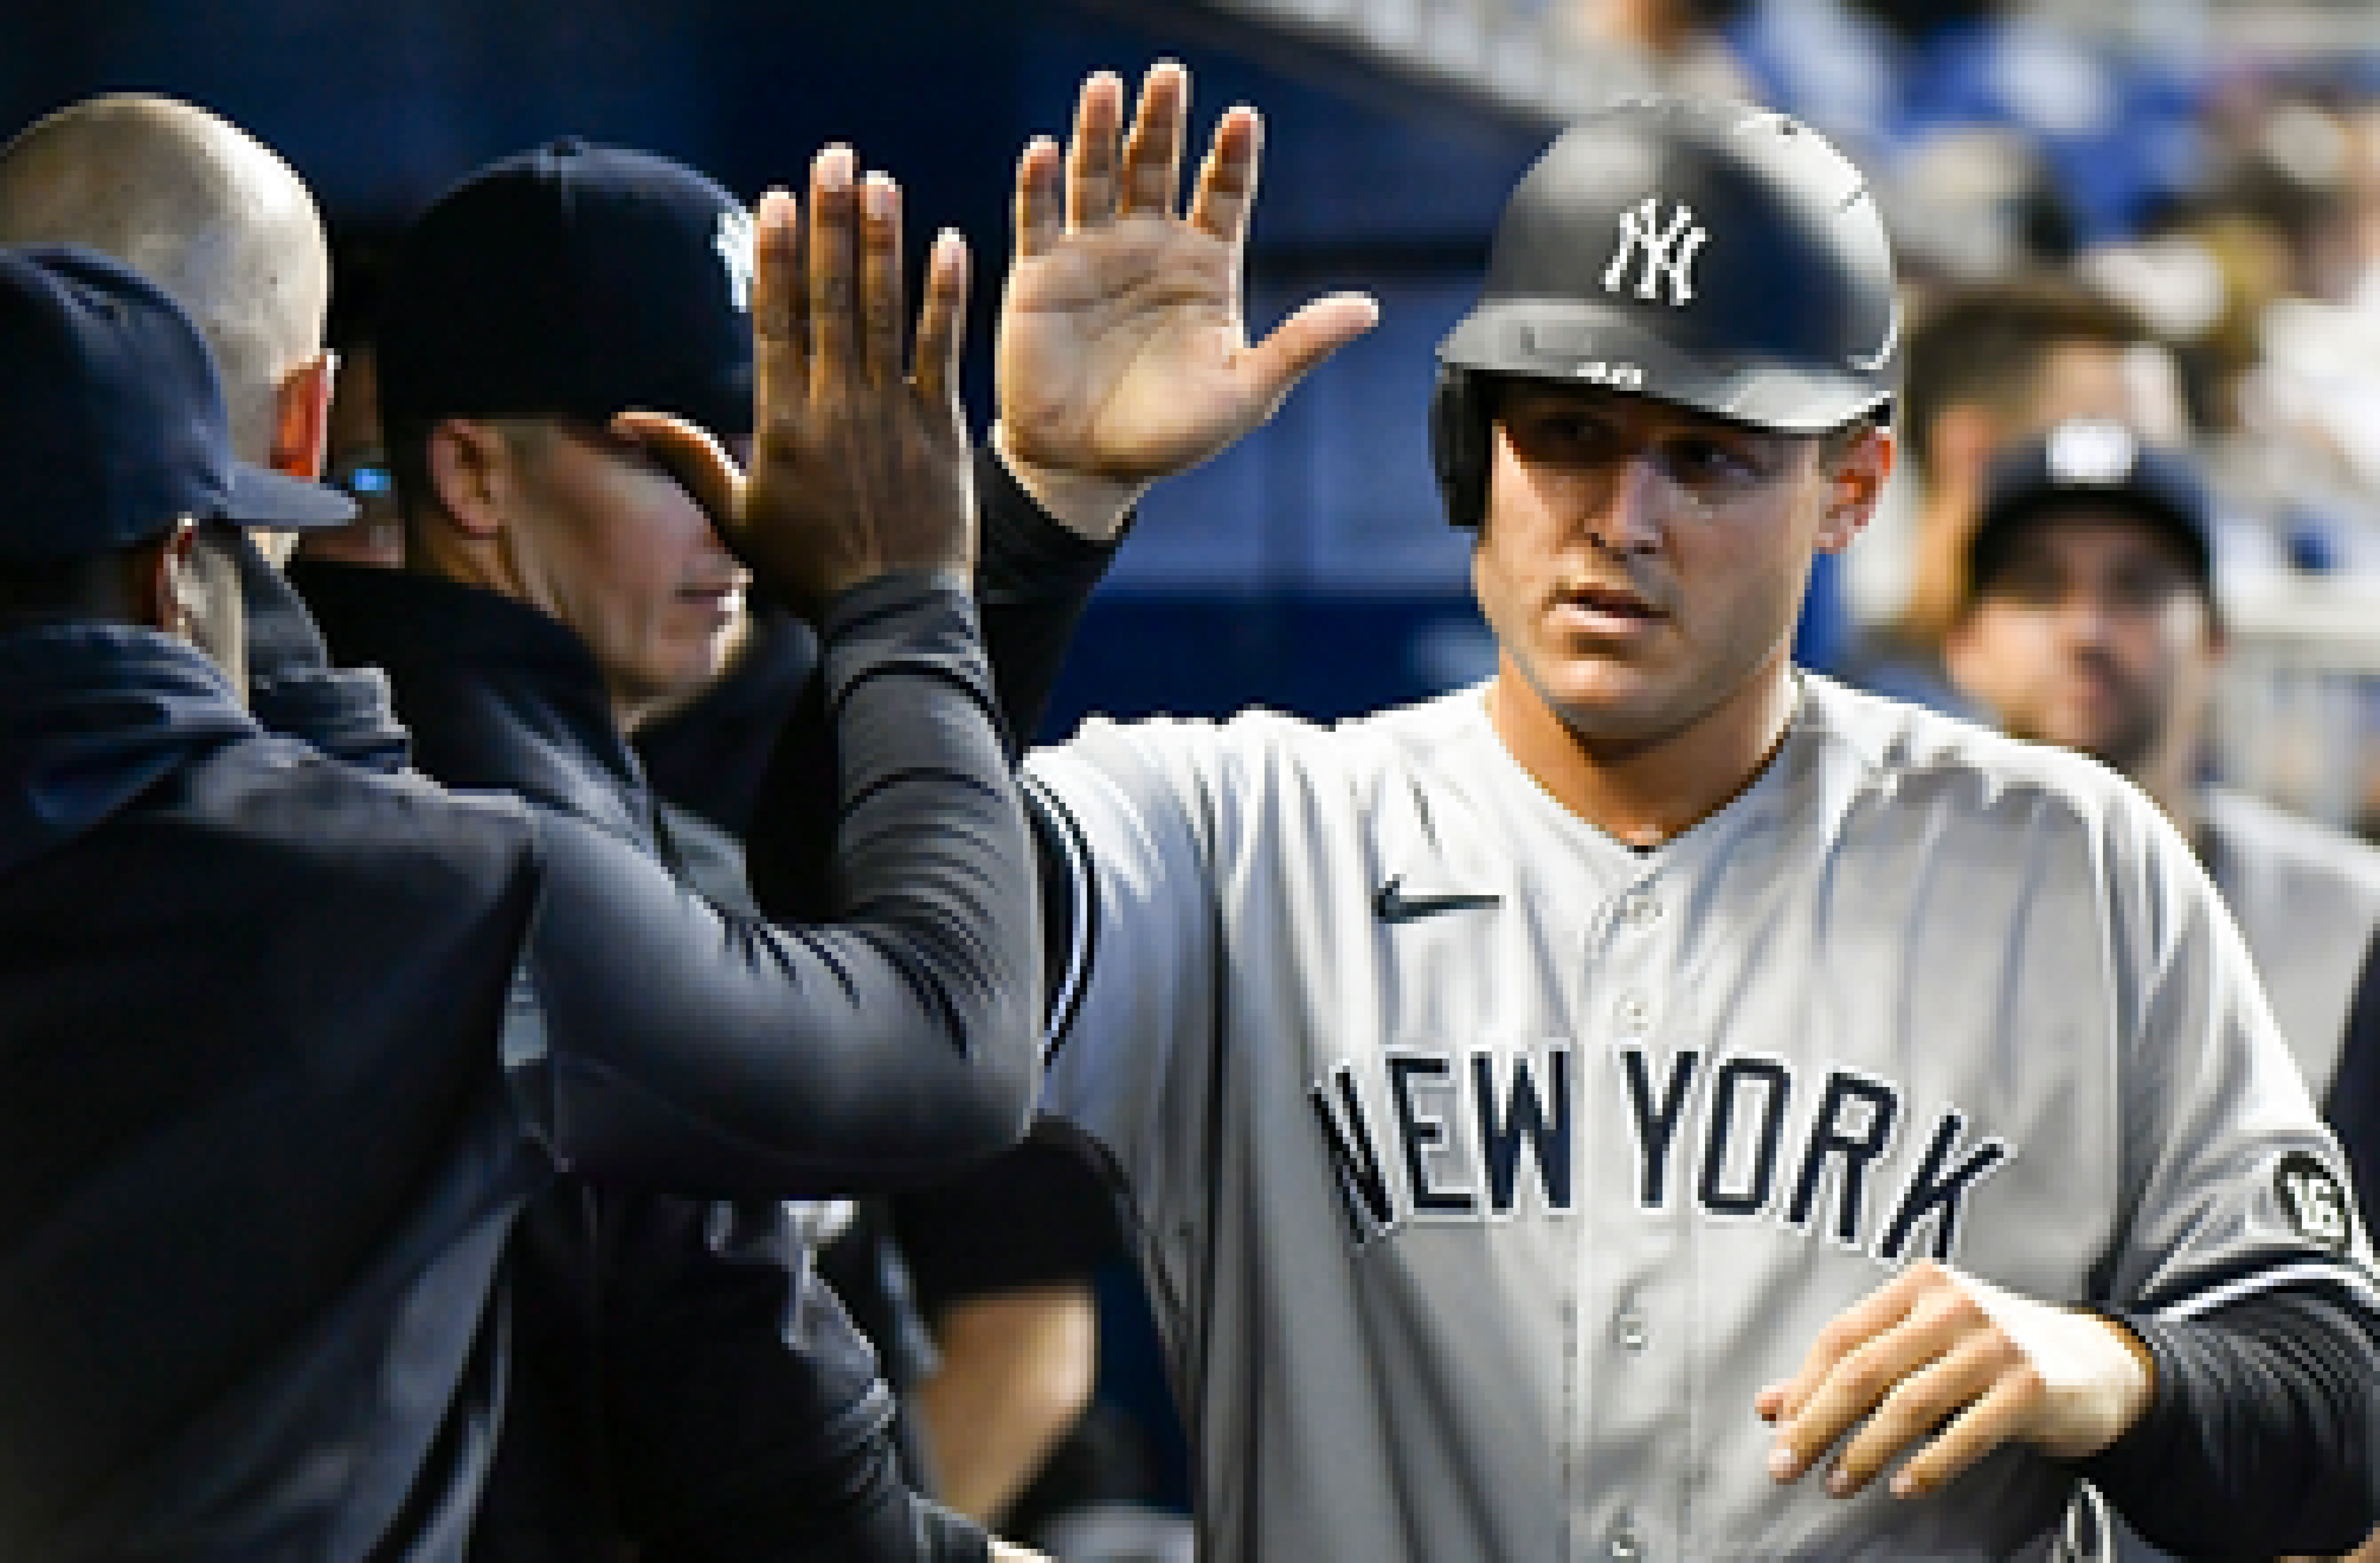 Anthony Rizzo homers again, Yankees double up Marlins, 4-2